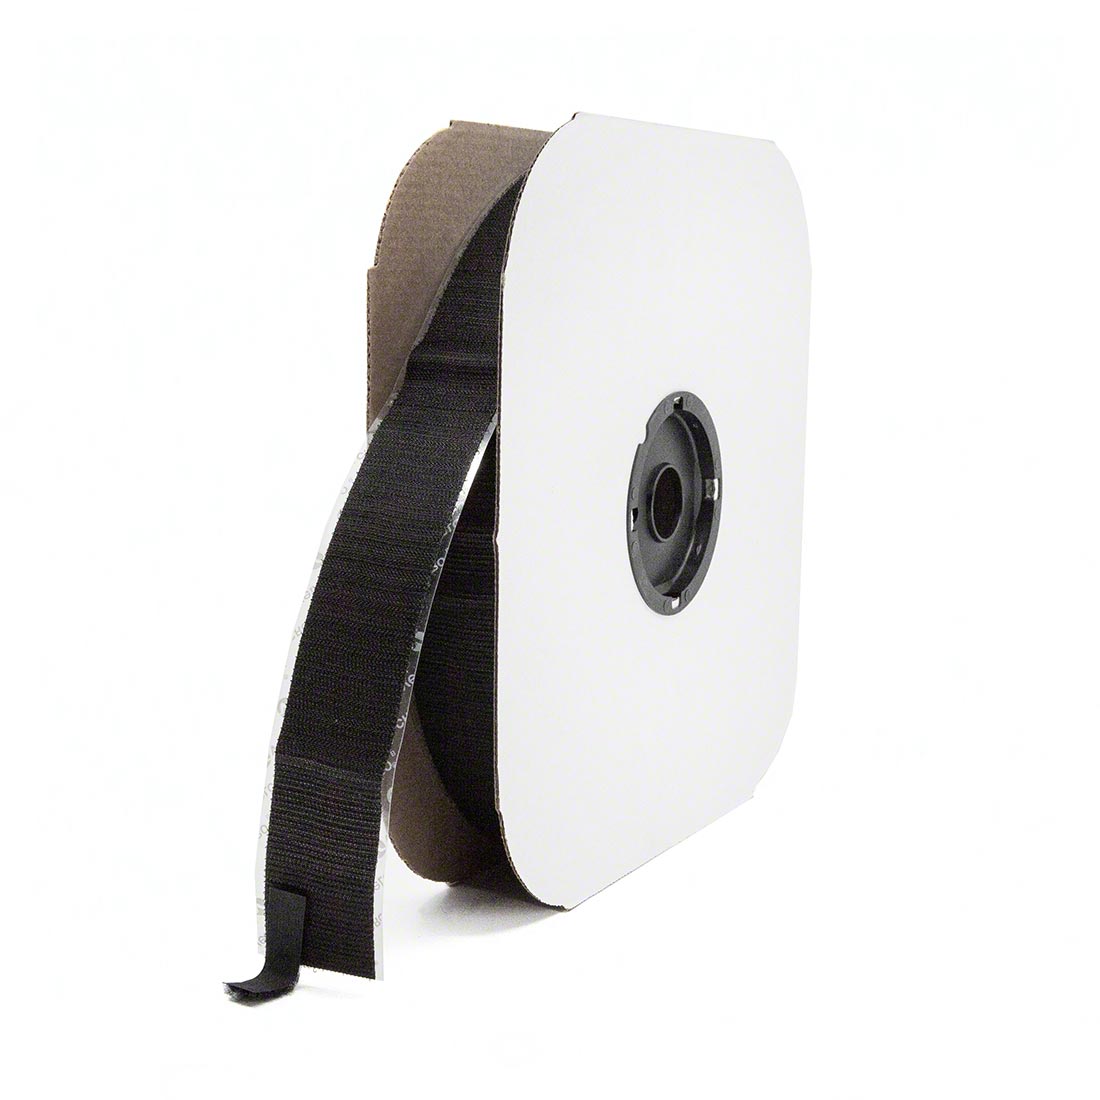  Velcro Sticky Back 3/4-Inch by 25-Yard Loop Tape